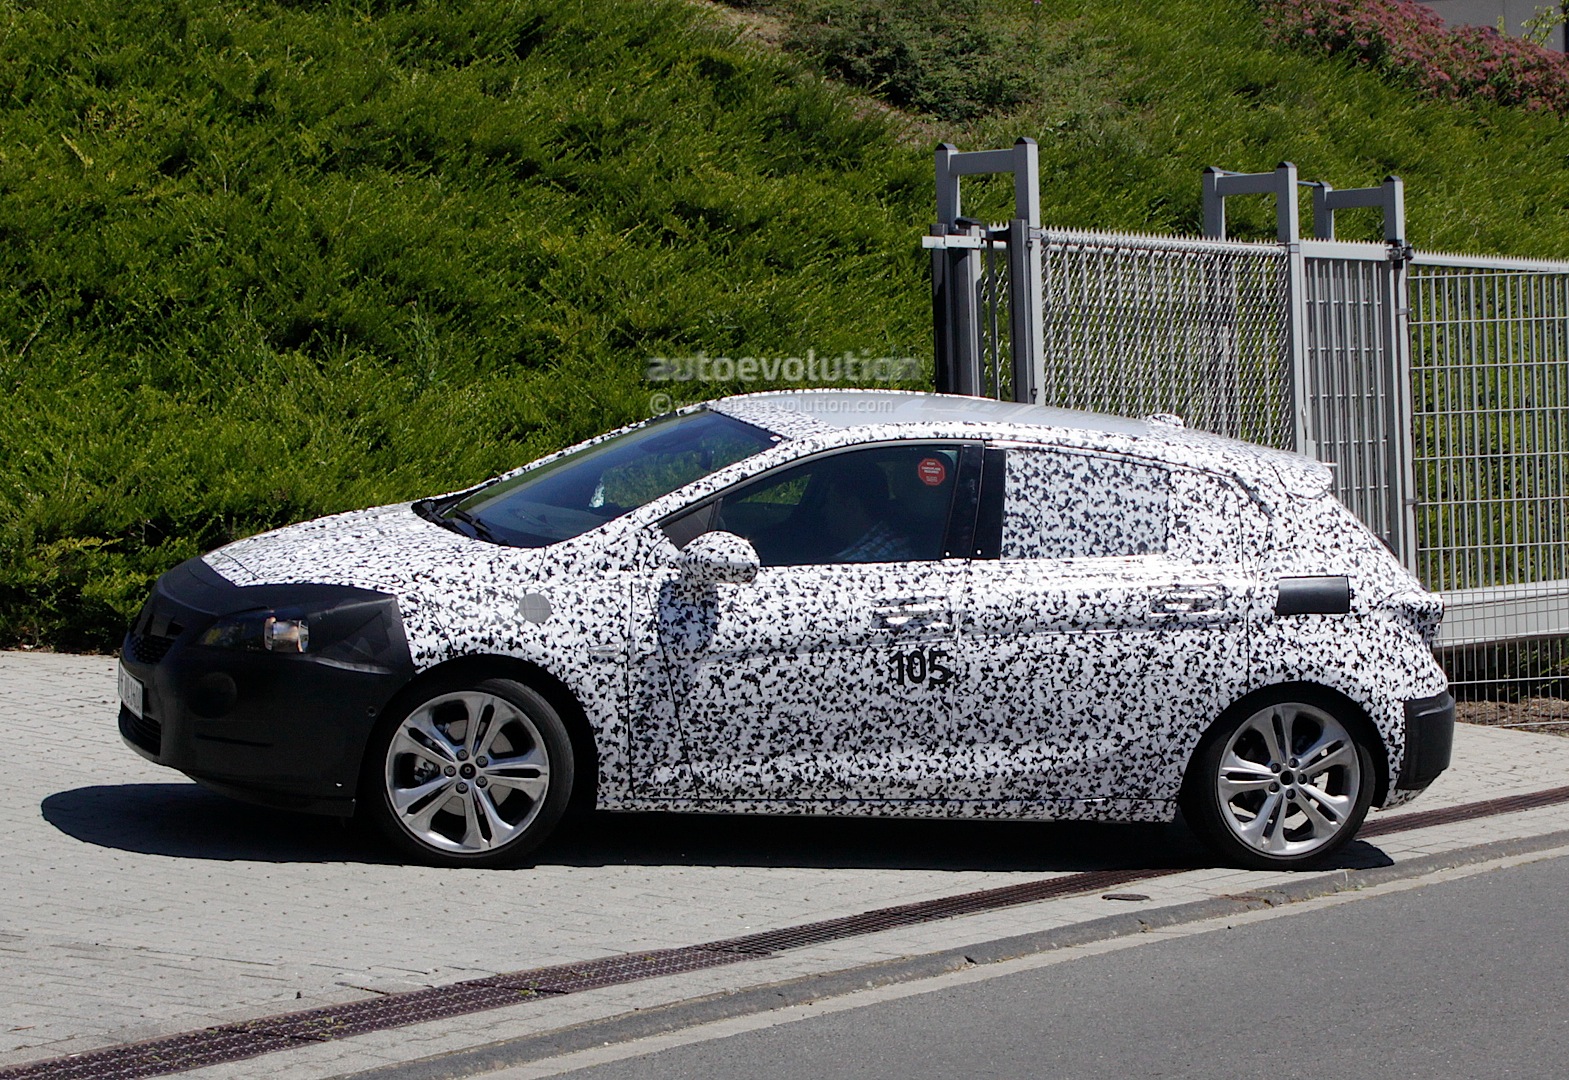 2015 - [Opel] Astra V [K] - Page 5 All-new-opel-astra-k-arrives-at-nurburgring-ahead-of-first-high-speed-tests_3